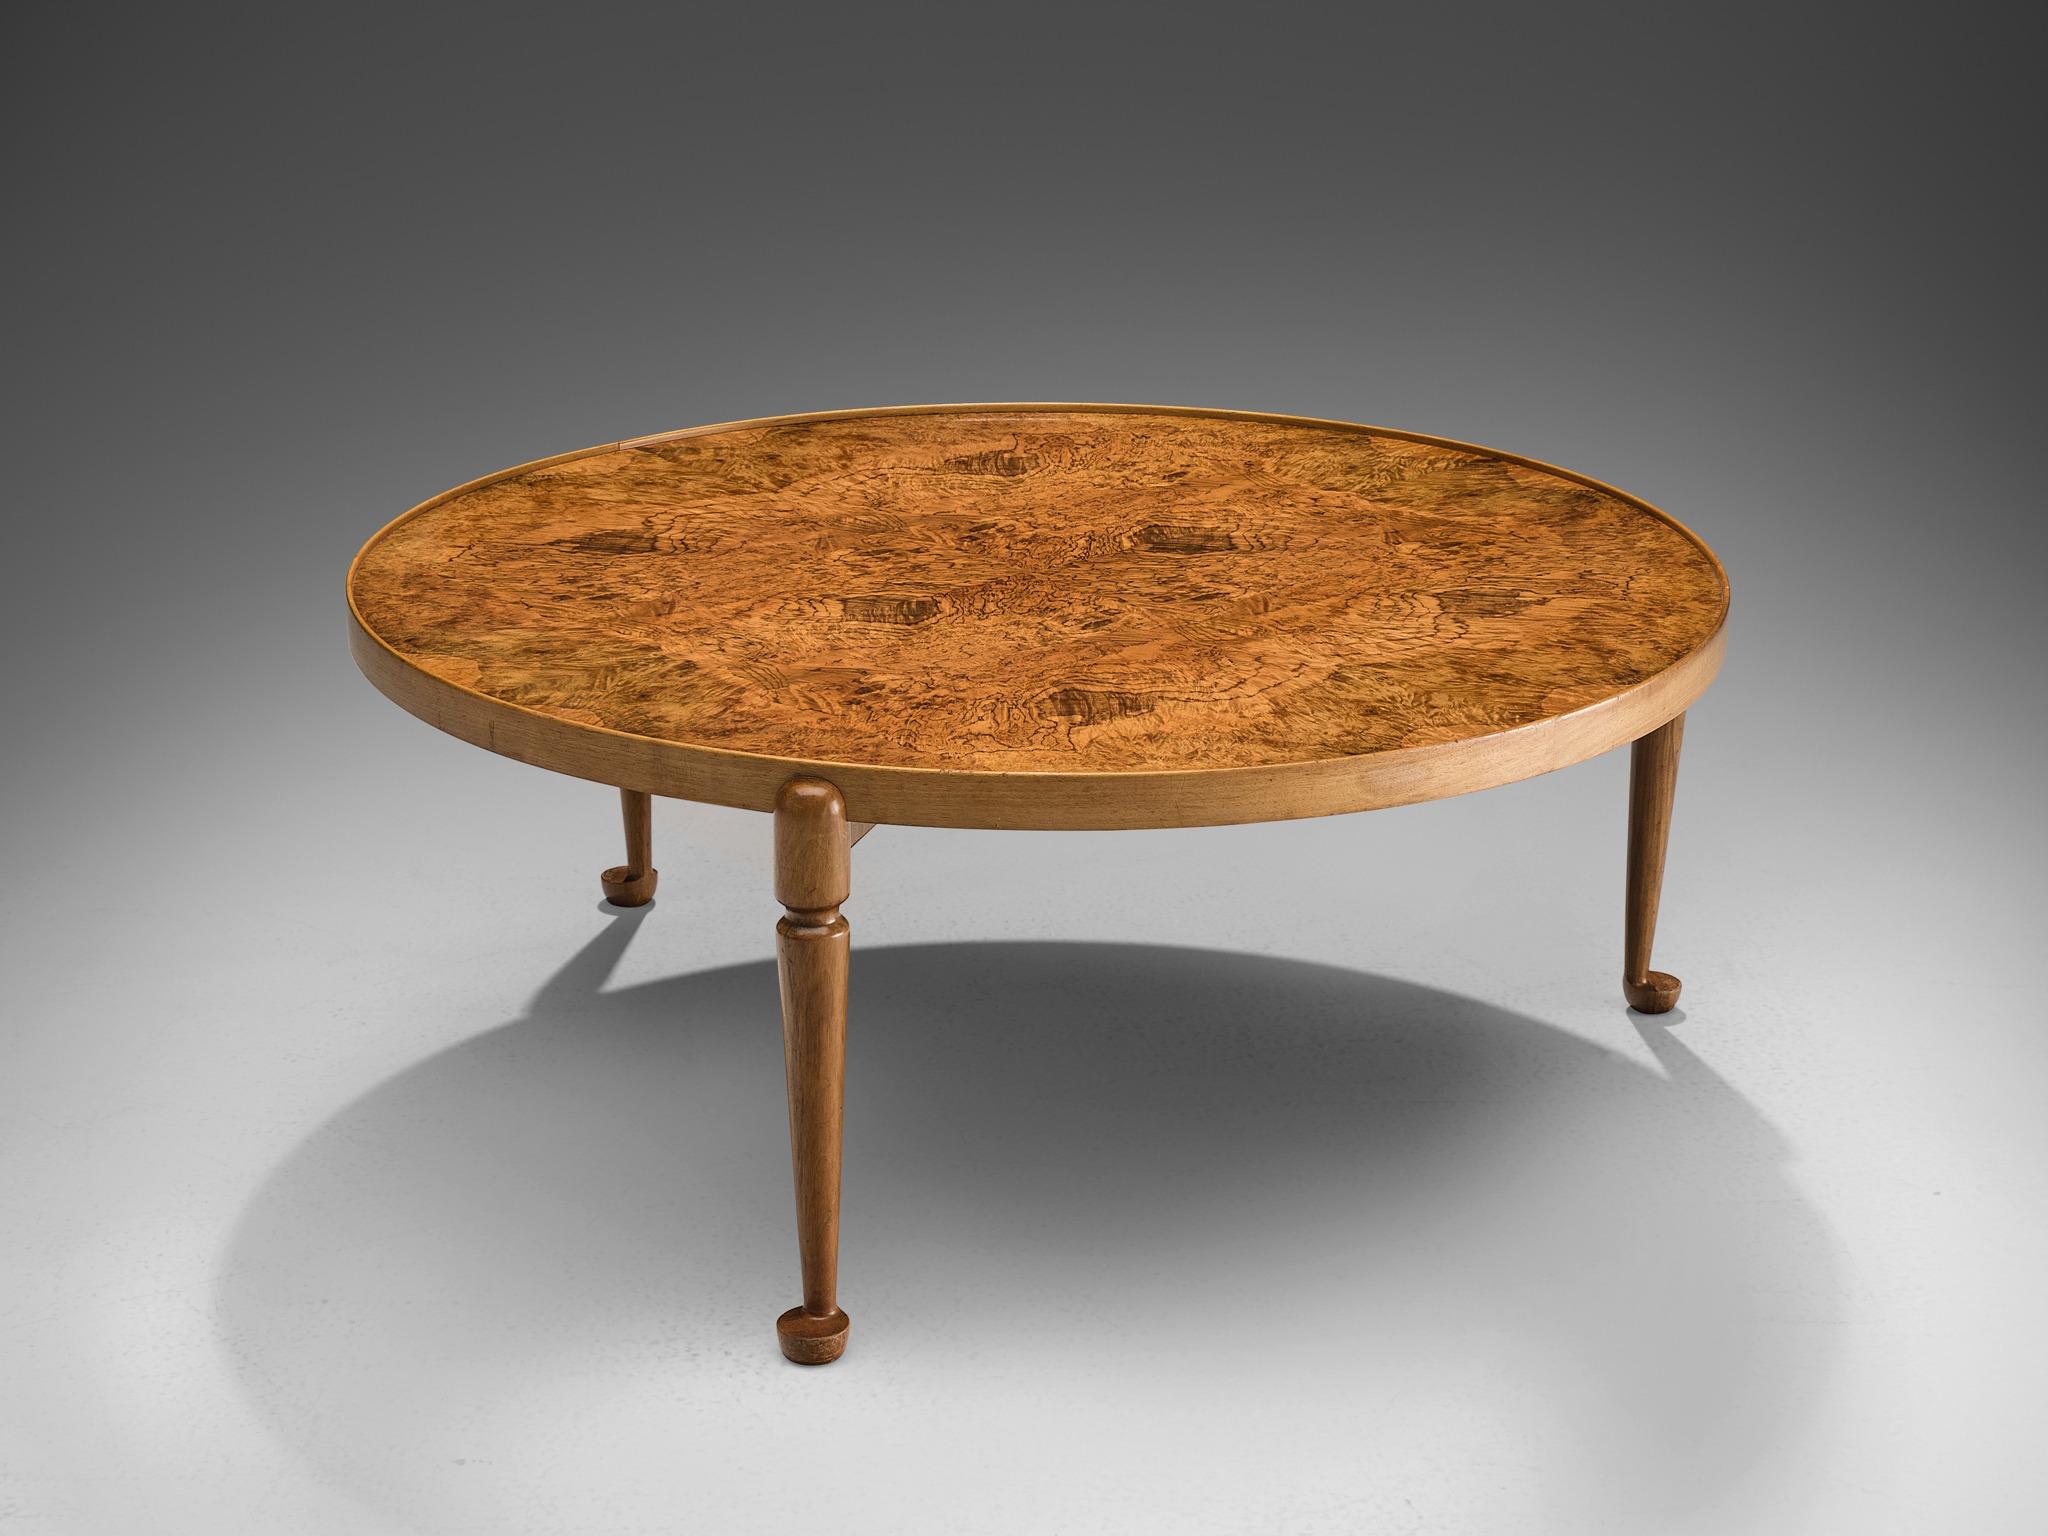 Josef Frank for Svenskt Tenn, coffee table model 2139, walnut legs and rim, amboyna burl top, design 1948, production later, Sweden.

This classic coffee table is designed by Josef Frank, circa 1948. The table features a burl amboyna top and